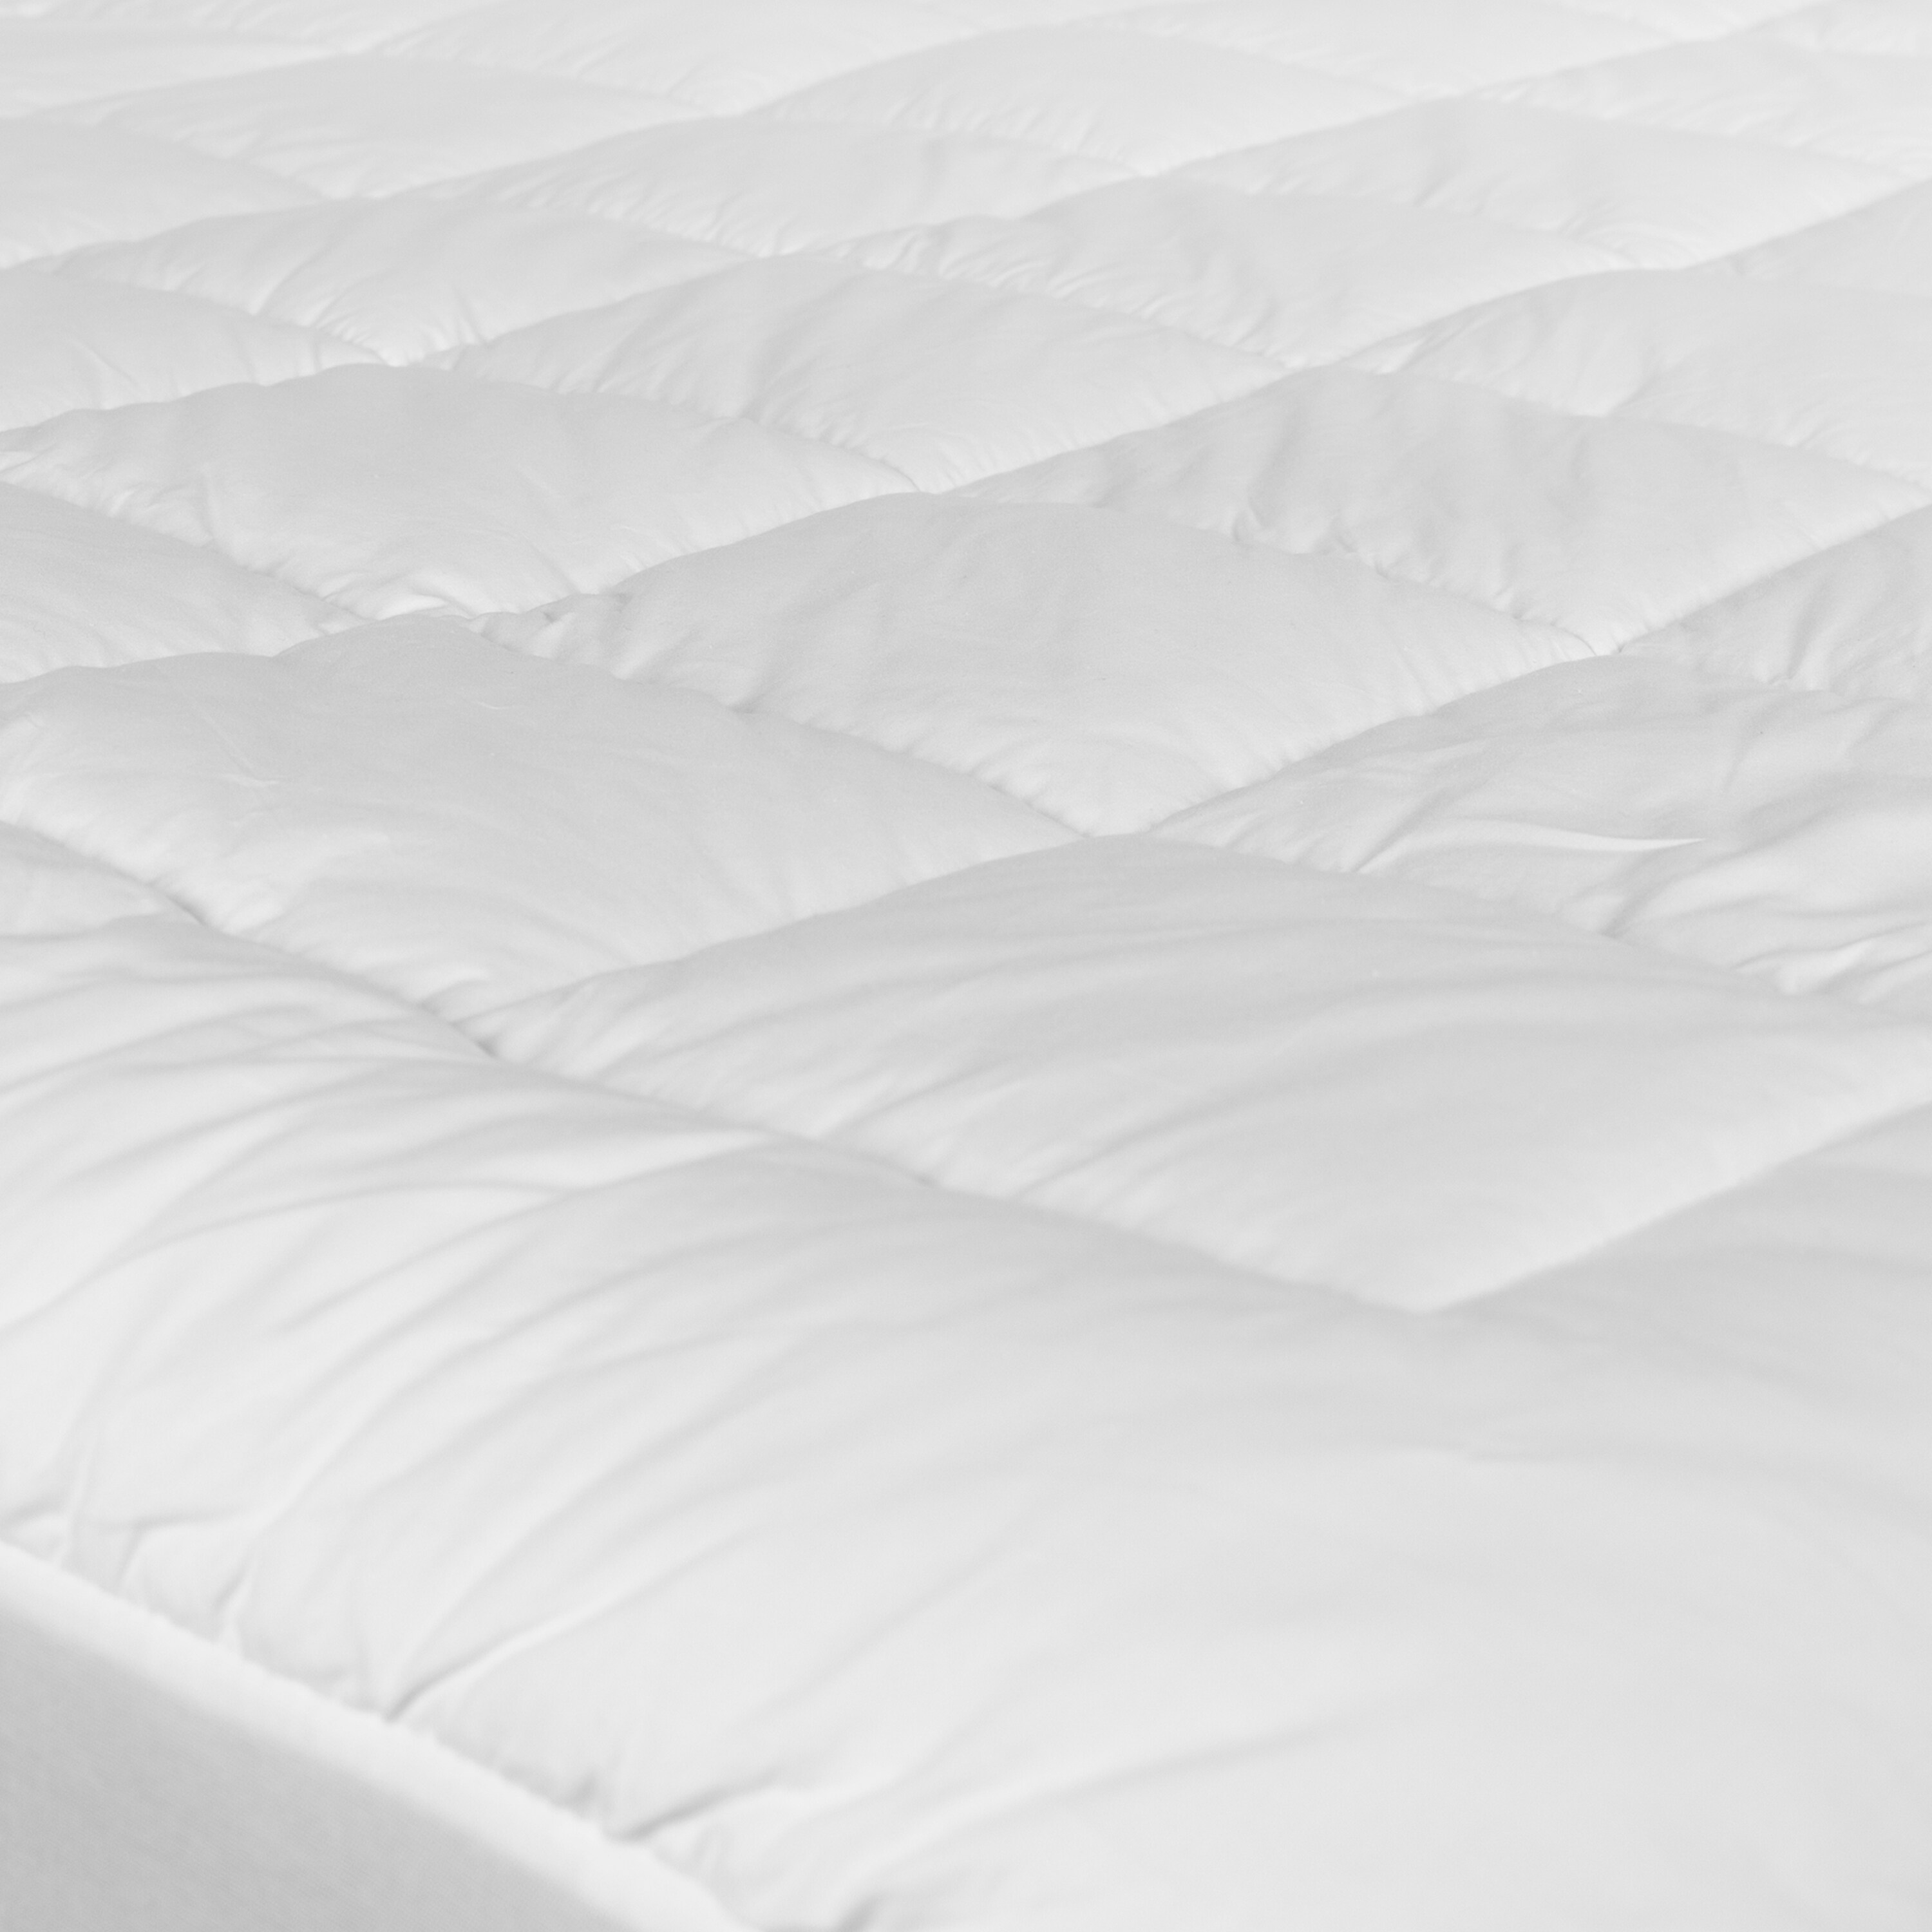 Details about   New White Mattress Pad Cover Deep Pocket Bed Sheet Topper Bug Dust Protector US 